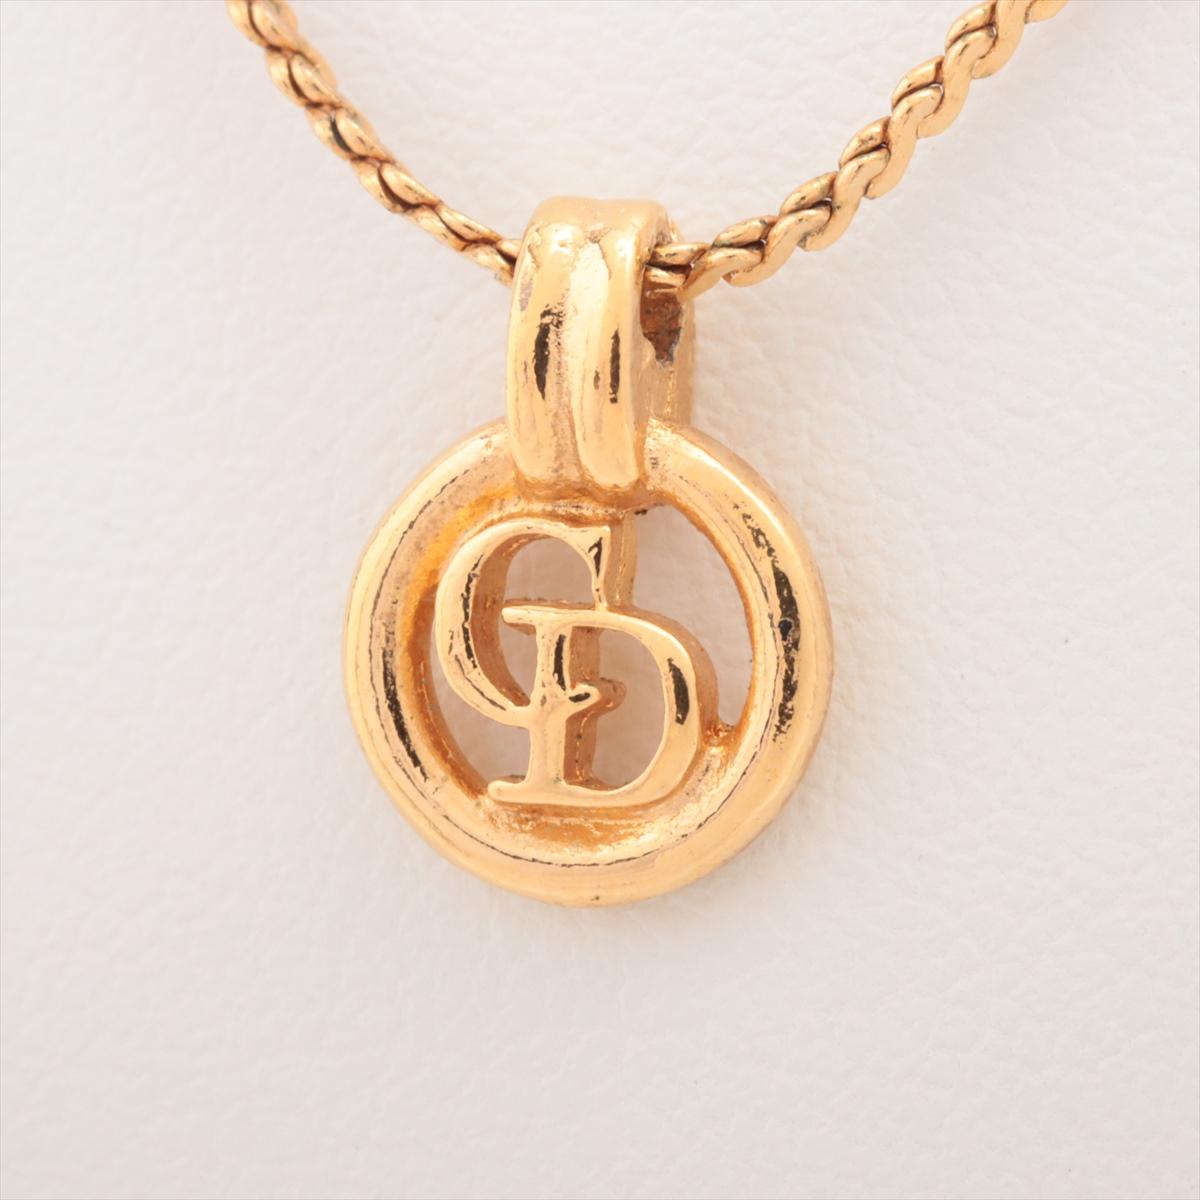 The Christian Dior Round CD Logo Necklace in radiant gold is a testament to Dior's commitment to timeless elegance and luxury. The exquisite necklace features a round pendant adorned with the iconic CD logo, showcasing the brand's signature style.